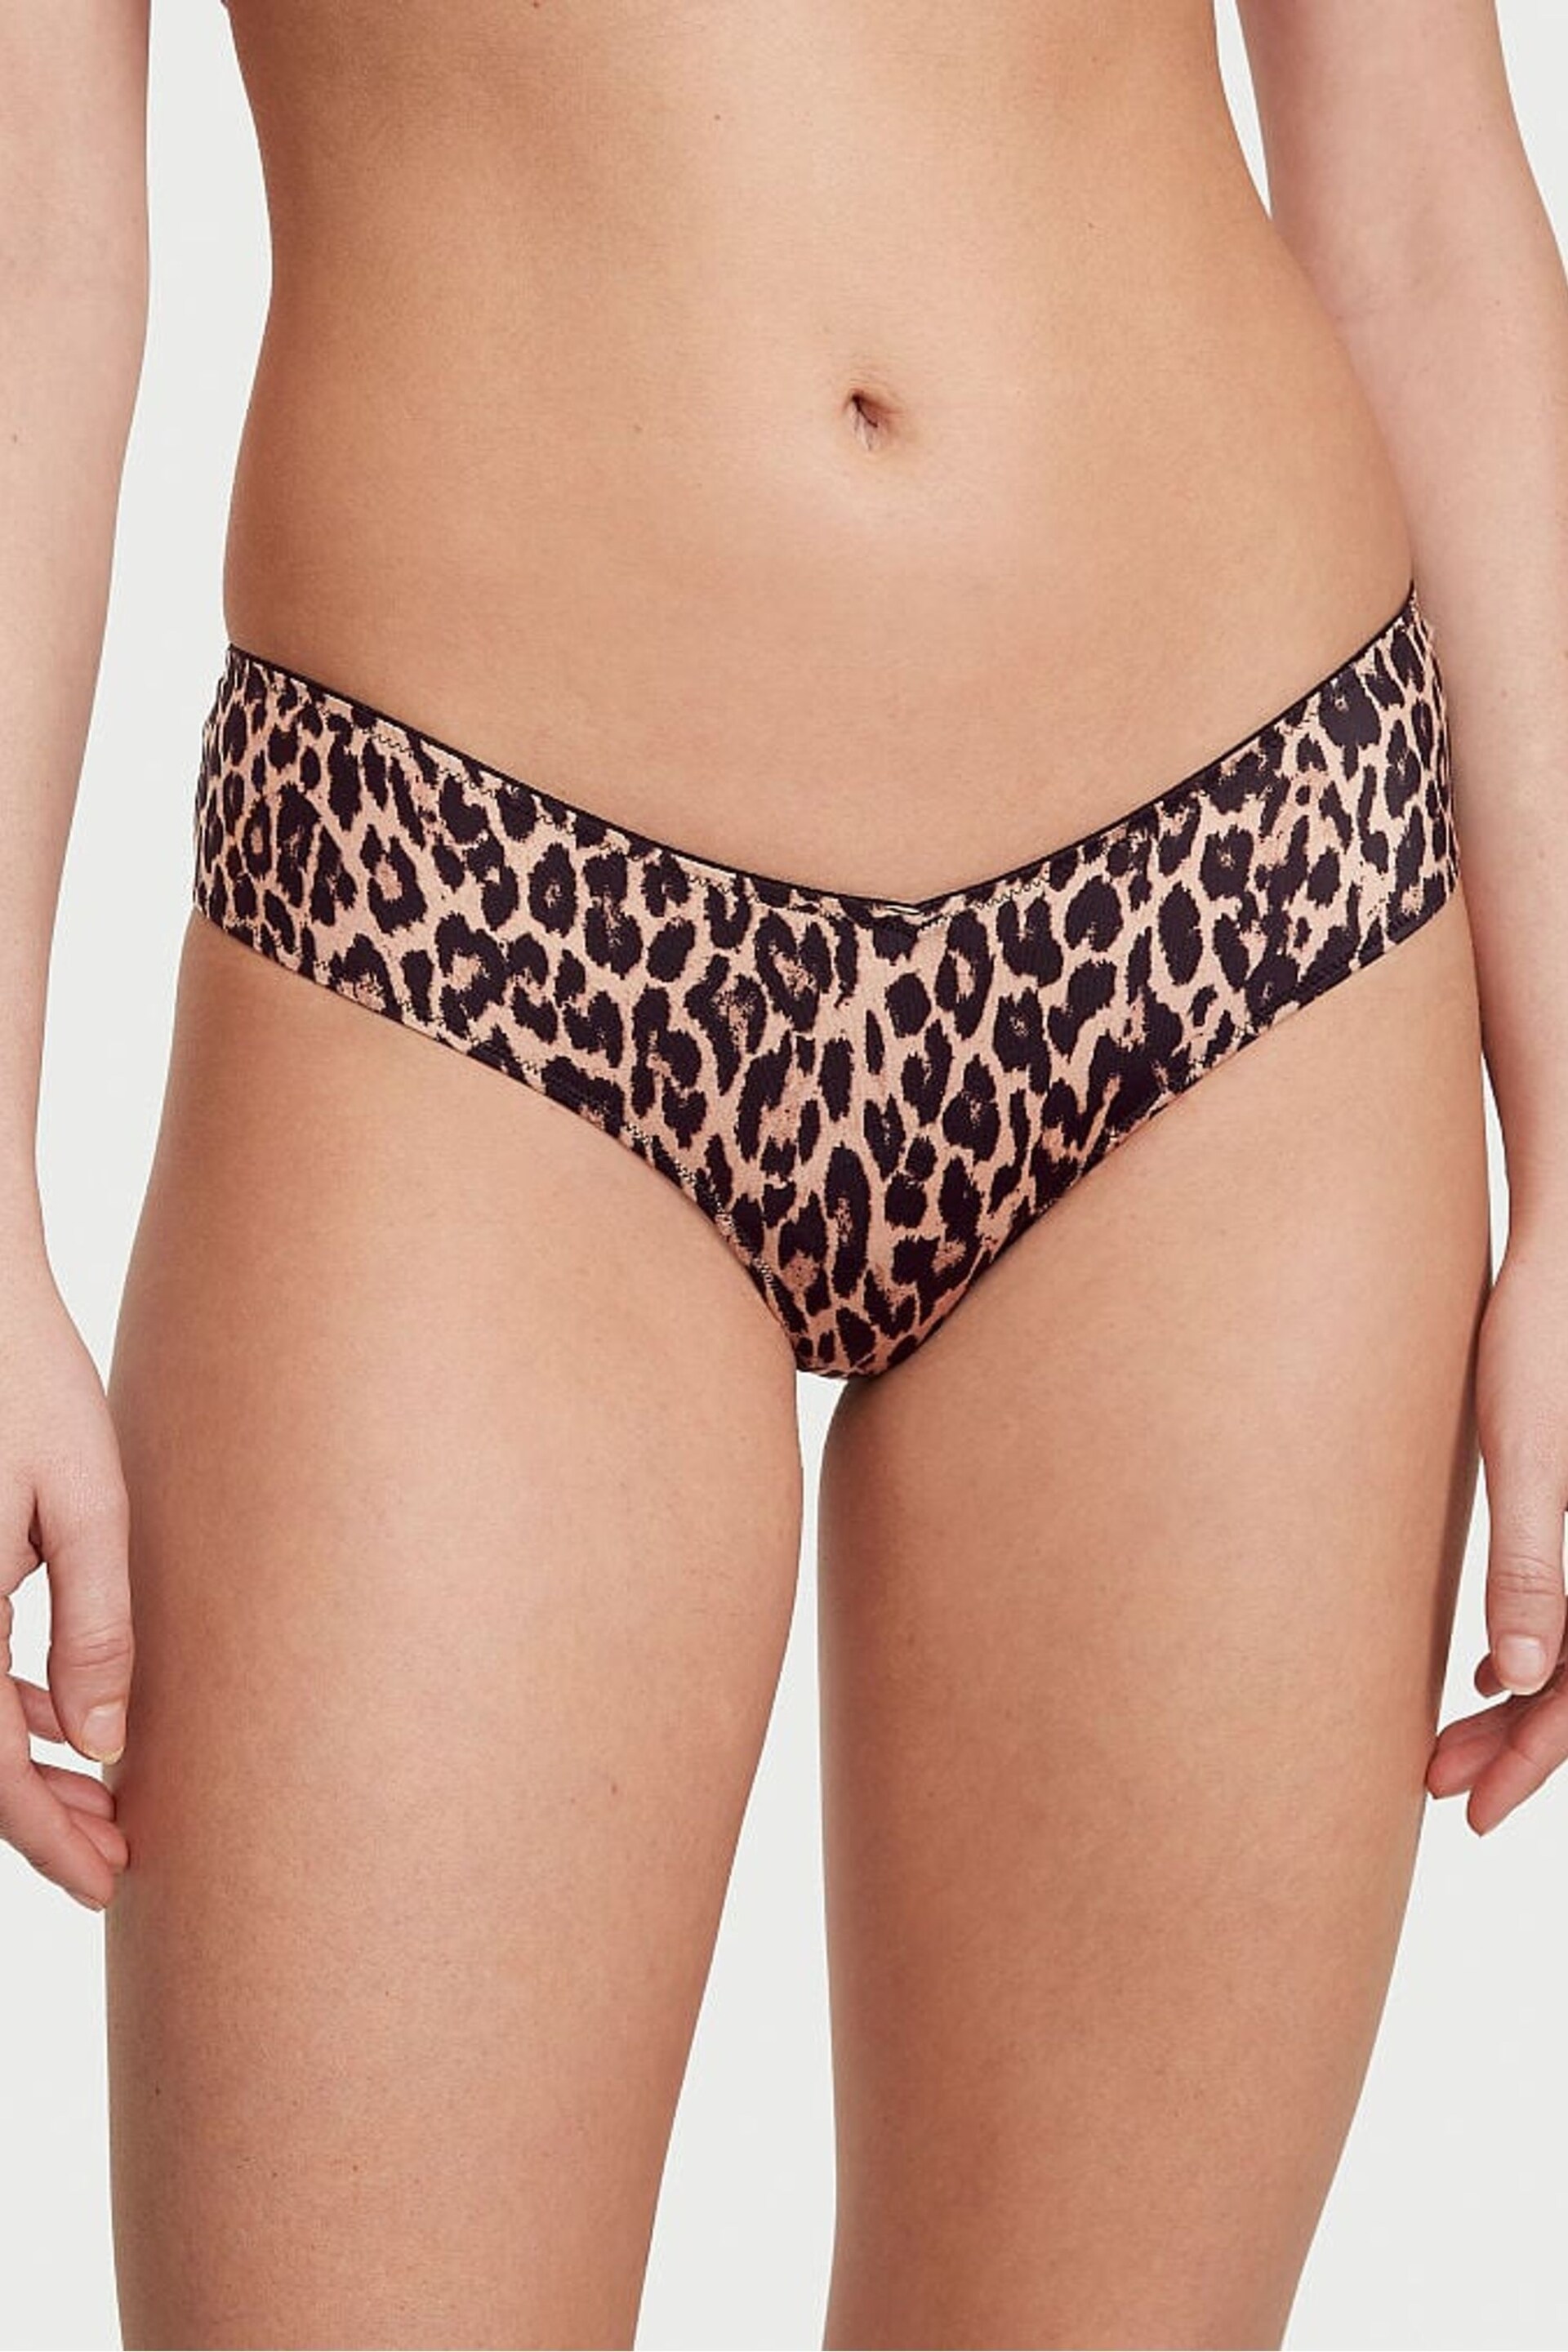 Victoria's Secret Sexy Leopard Brown Cheeky Knickers - Image 1 of 3